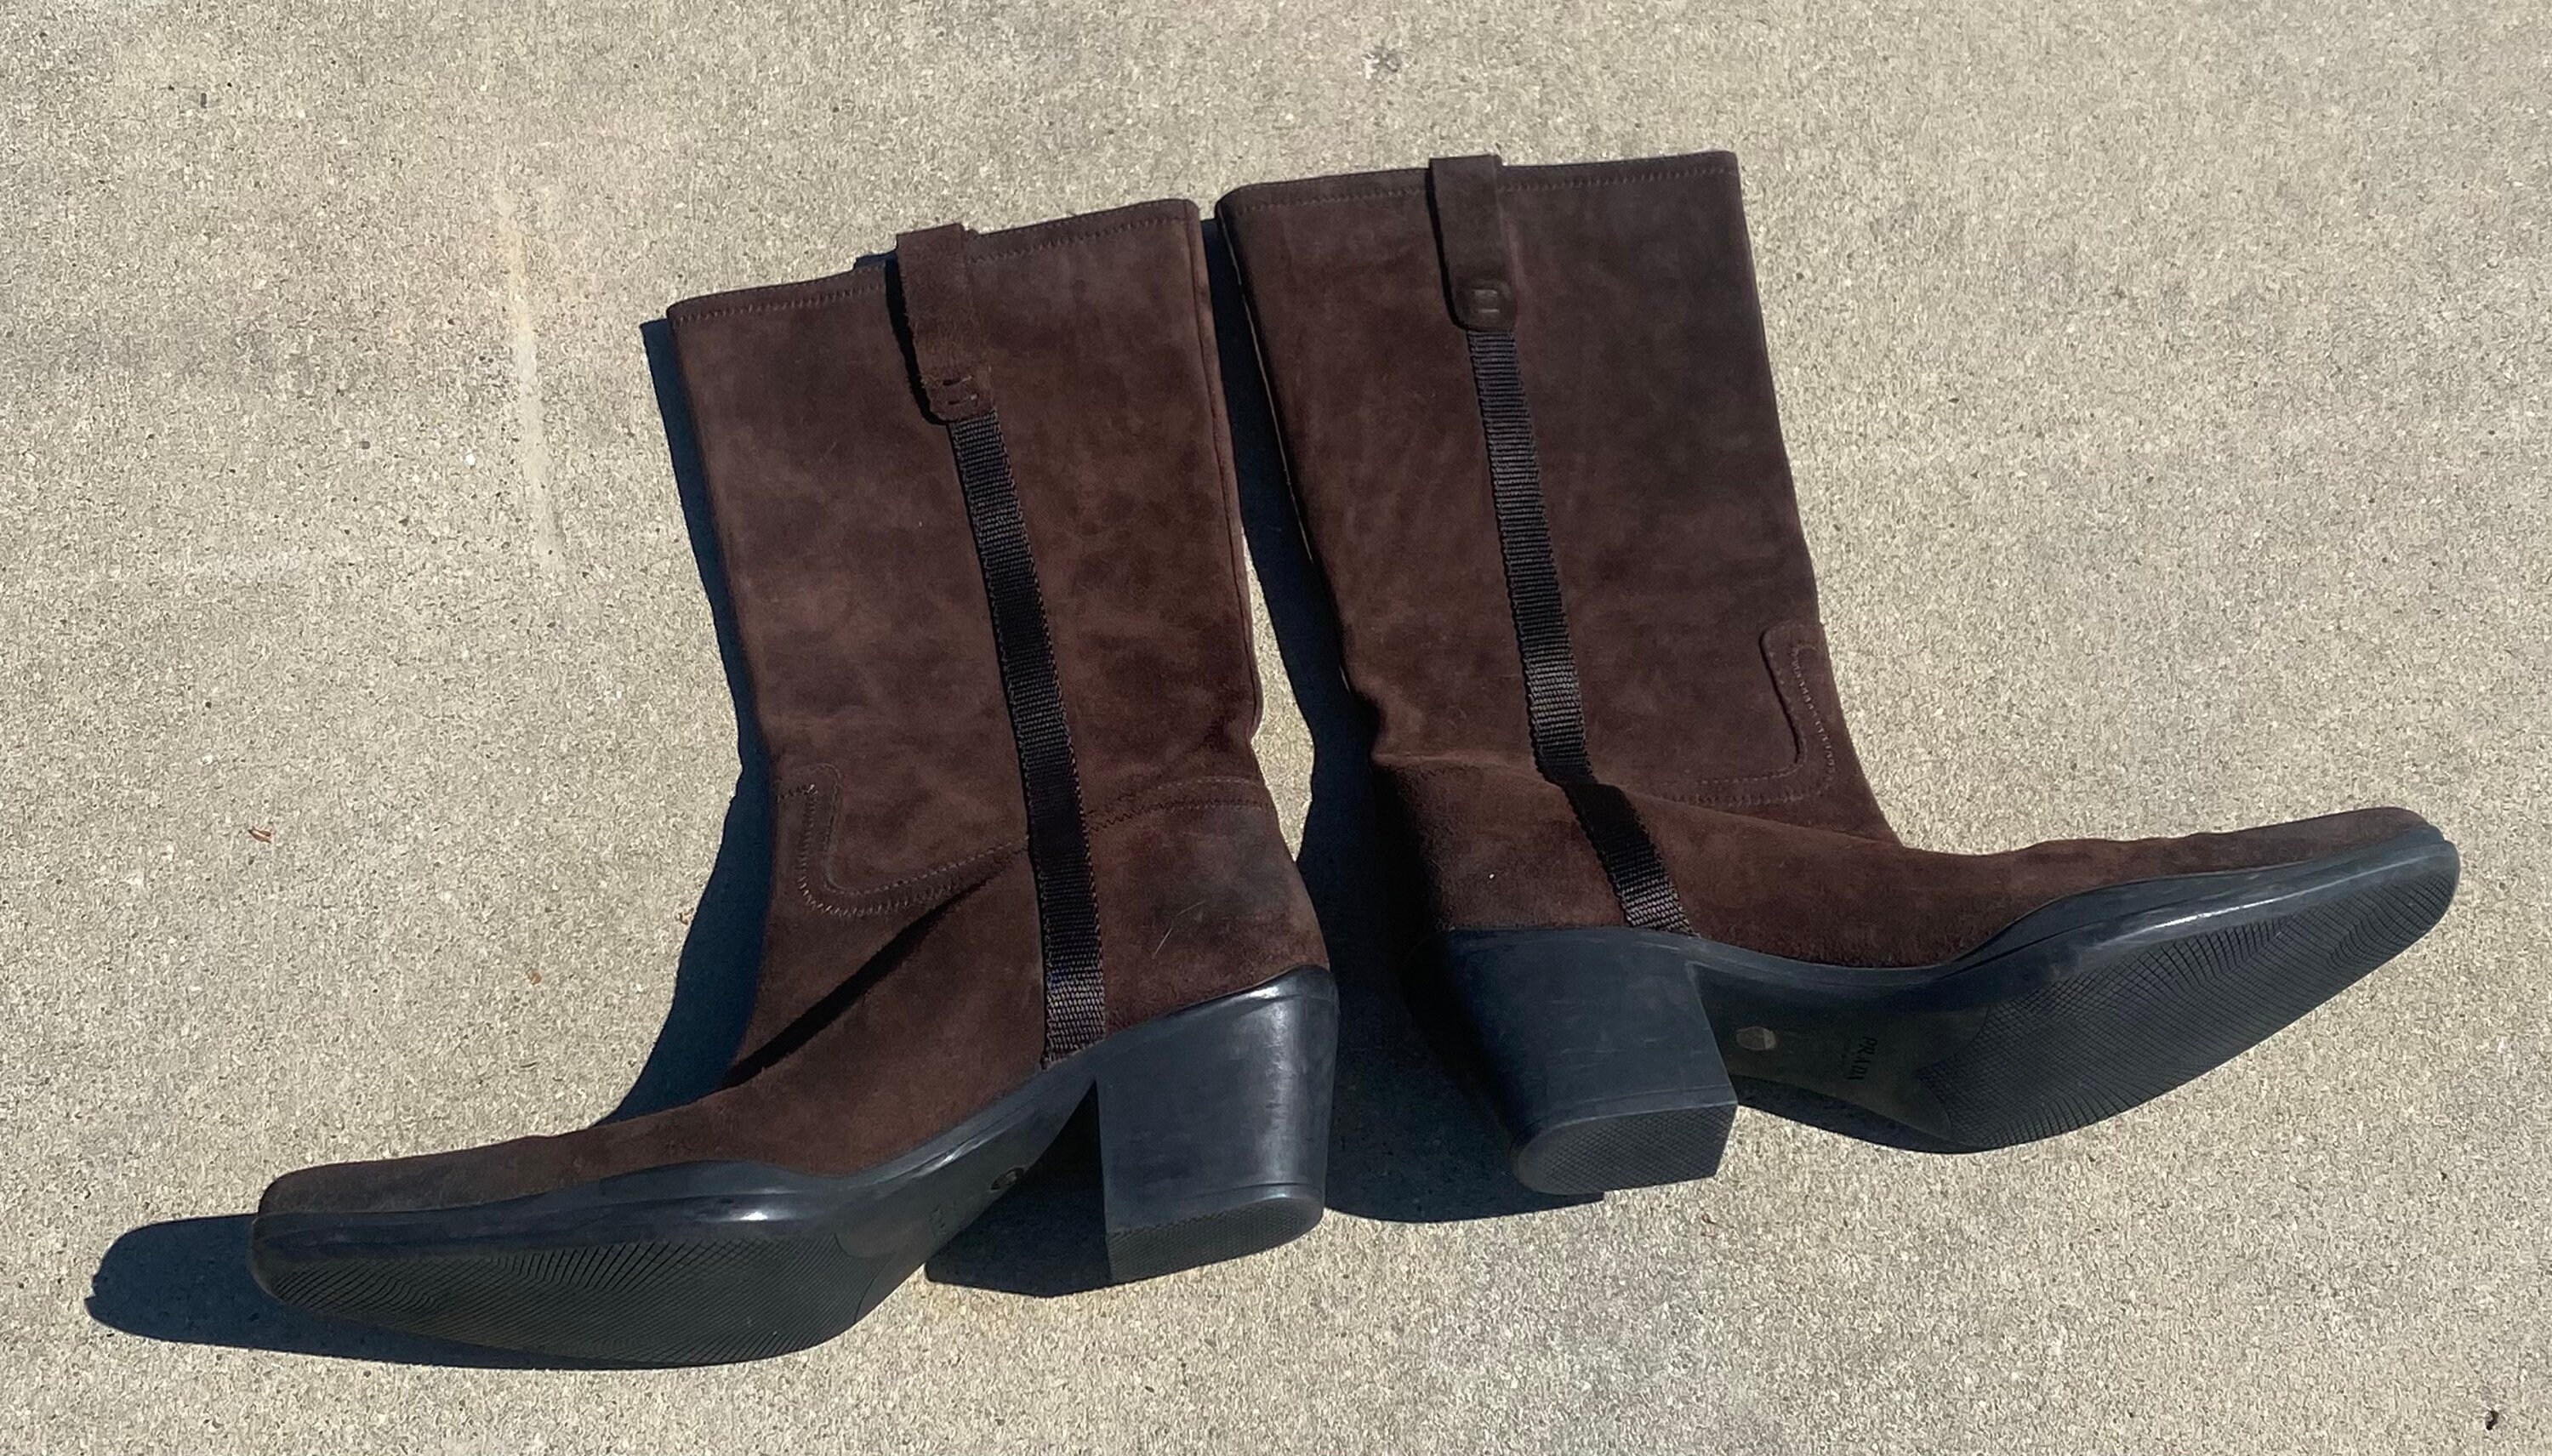 T O Stanley Boots: Pin Ostrich Boots -Regal Almond